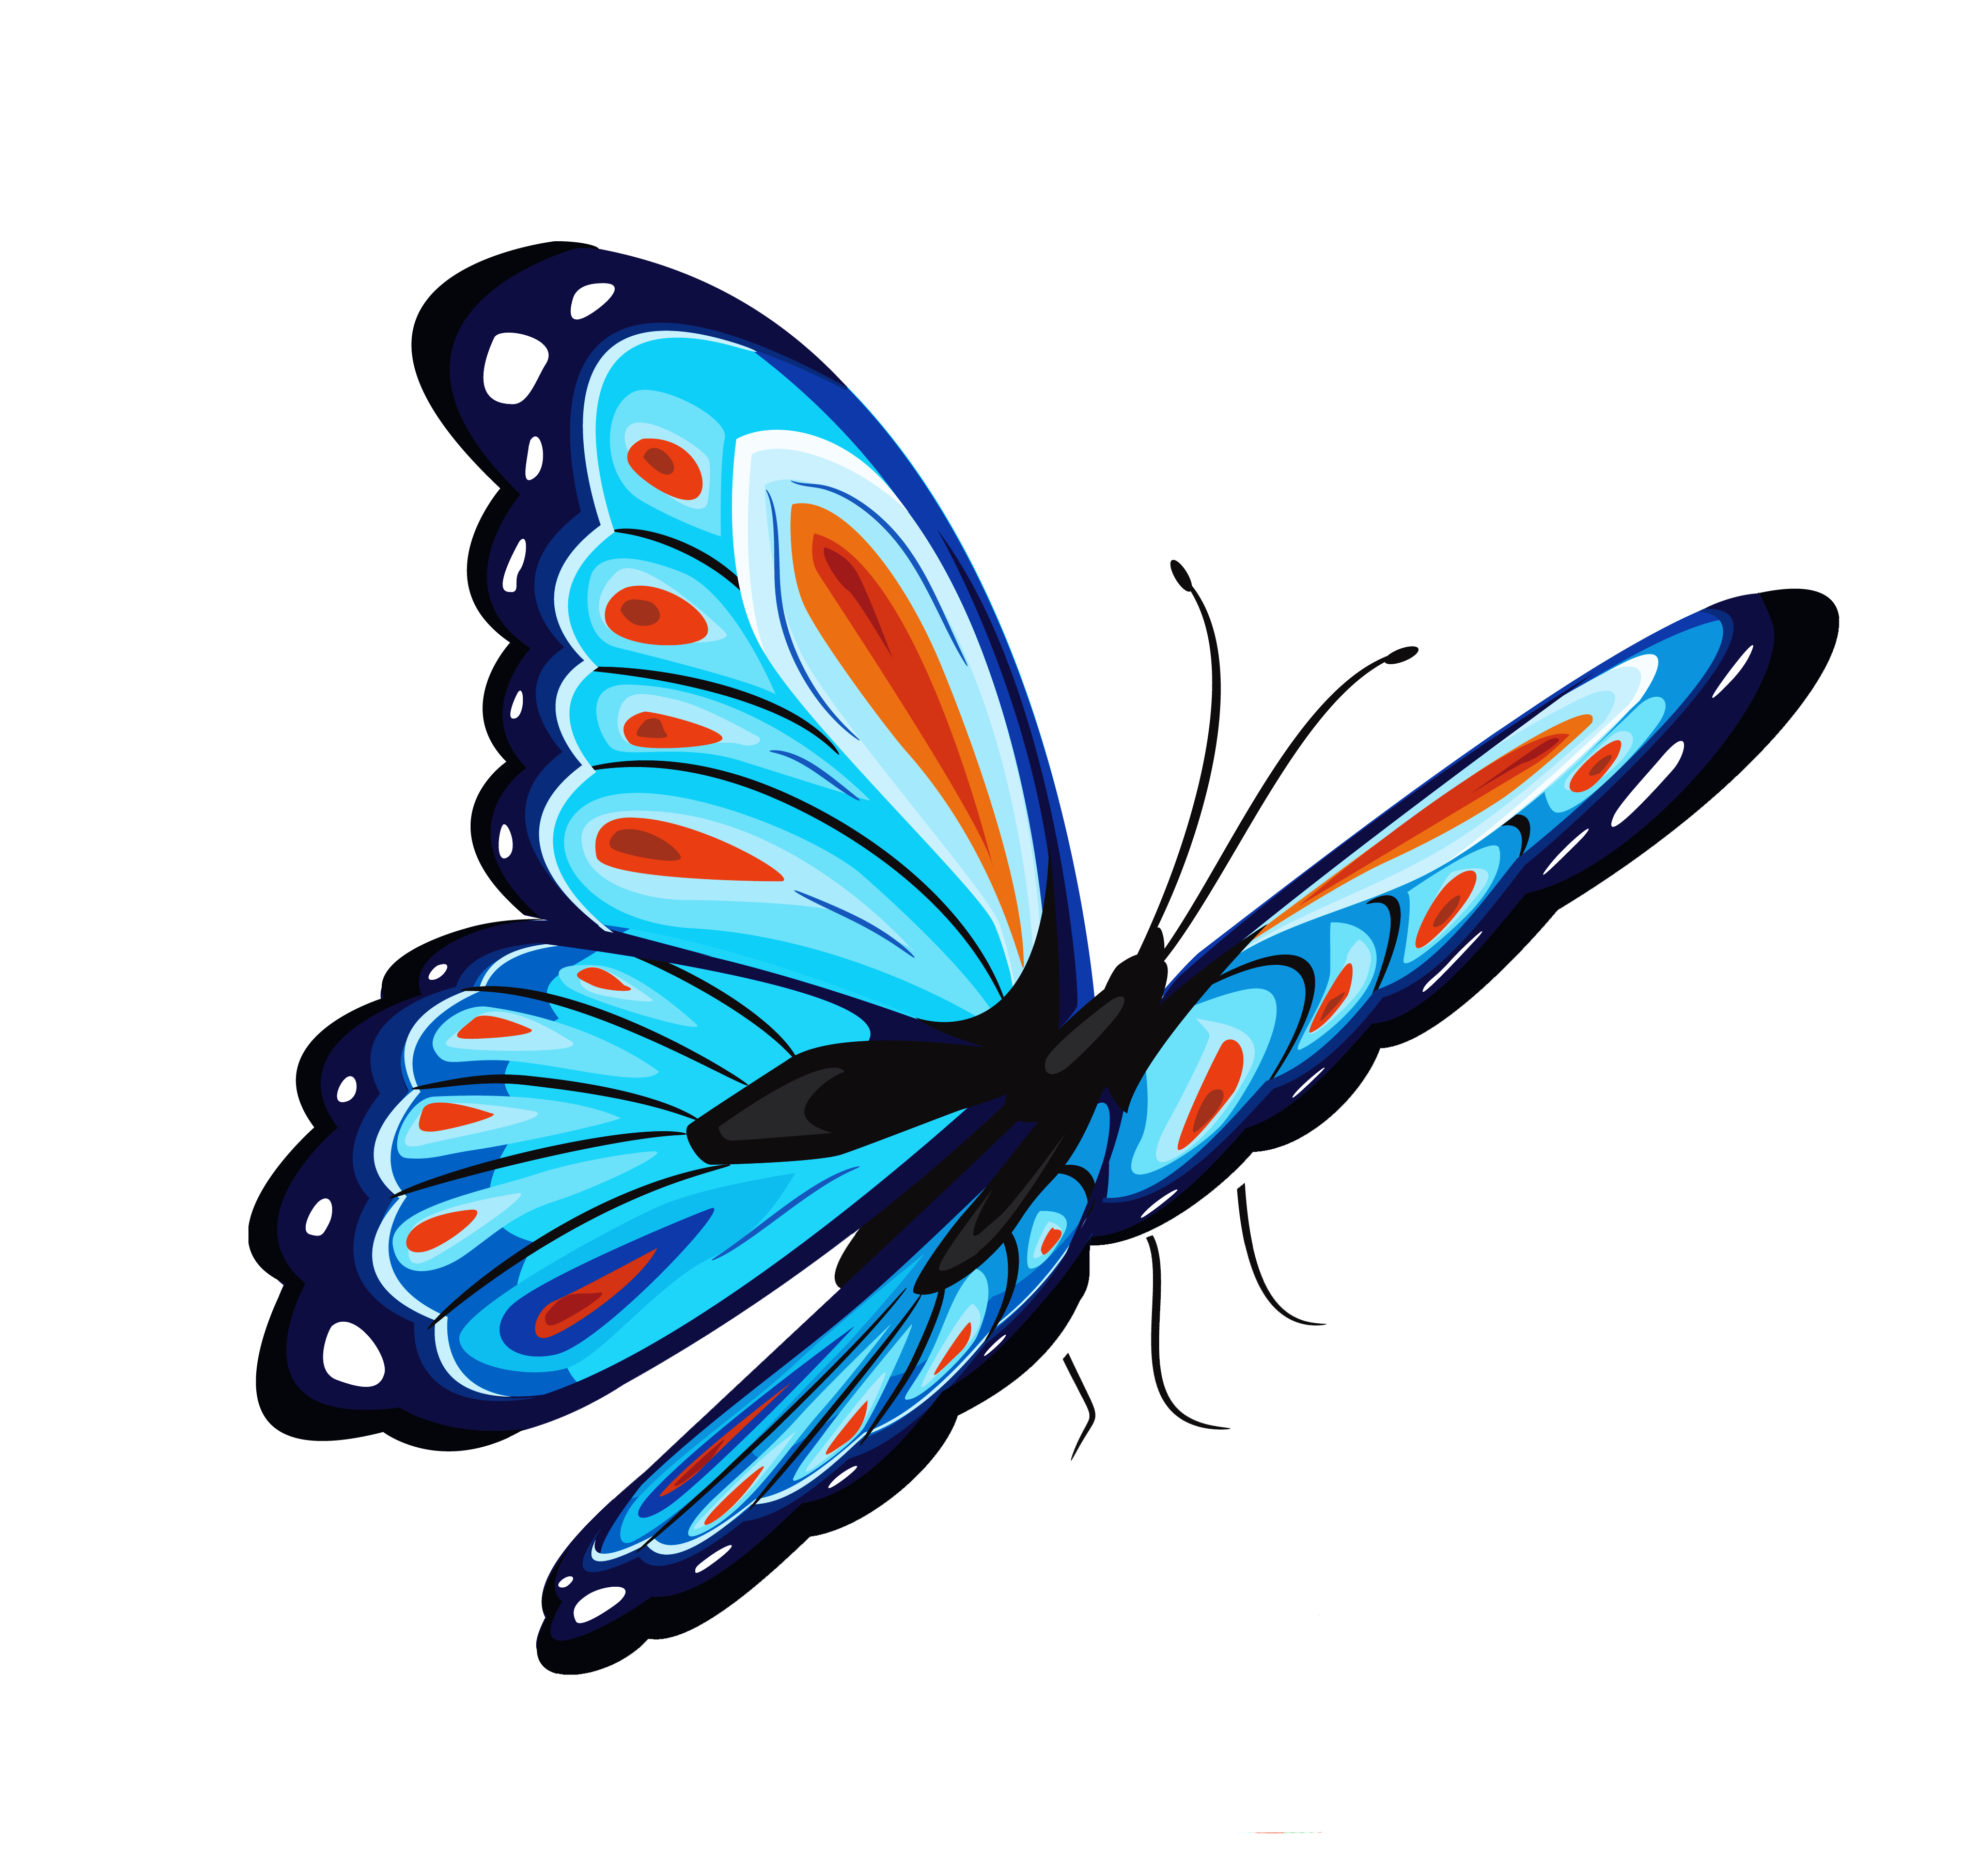 Blue Butterfly PNG Image